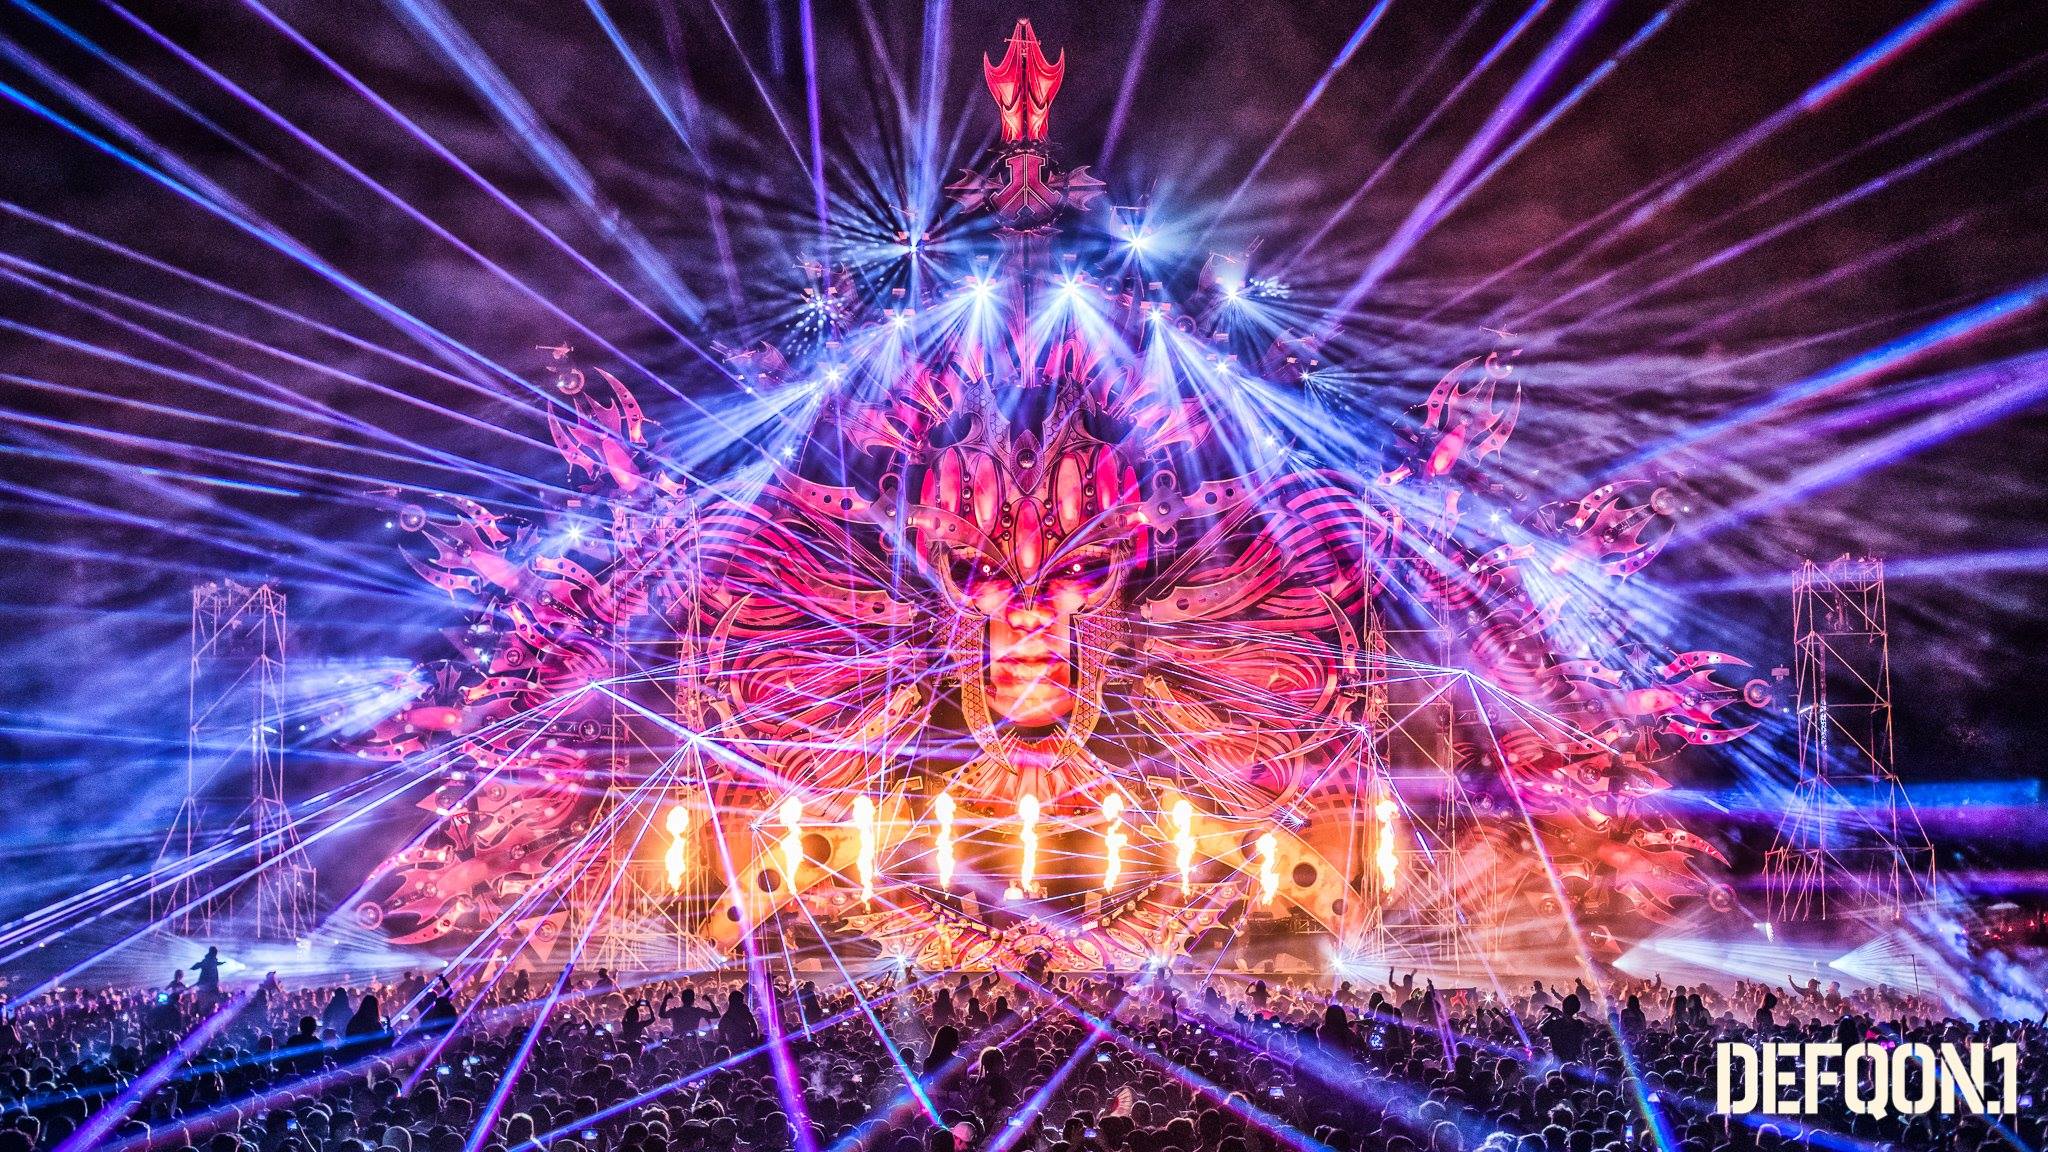 A FIRST TIMER'S GUIDE TO DEFQON 1